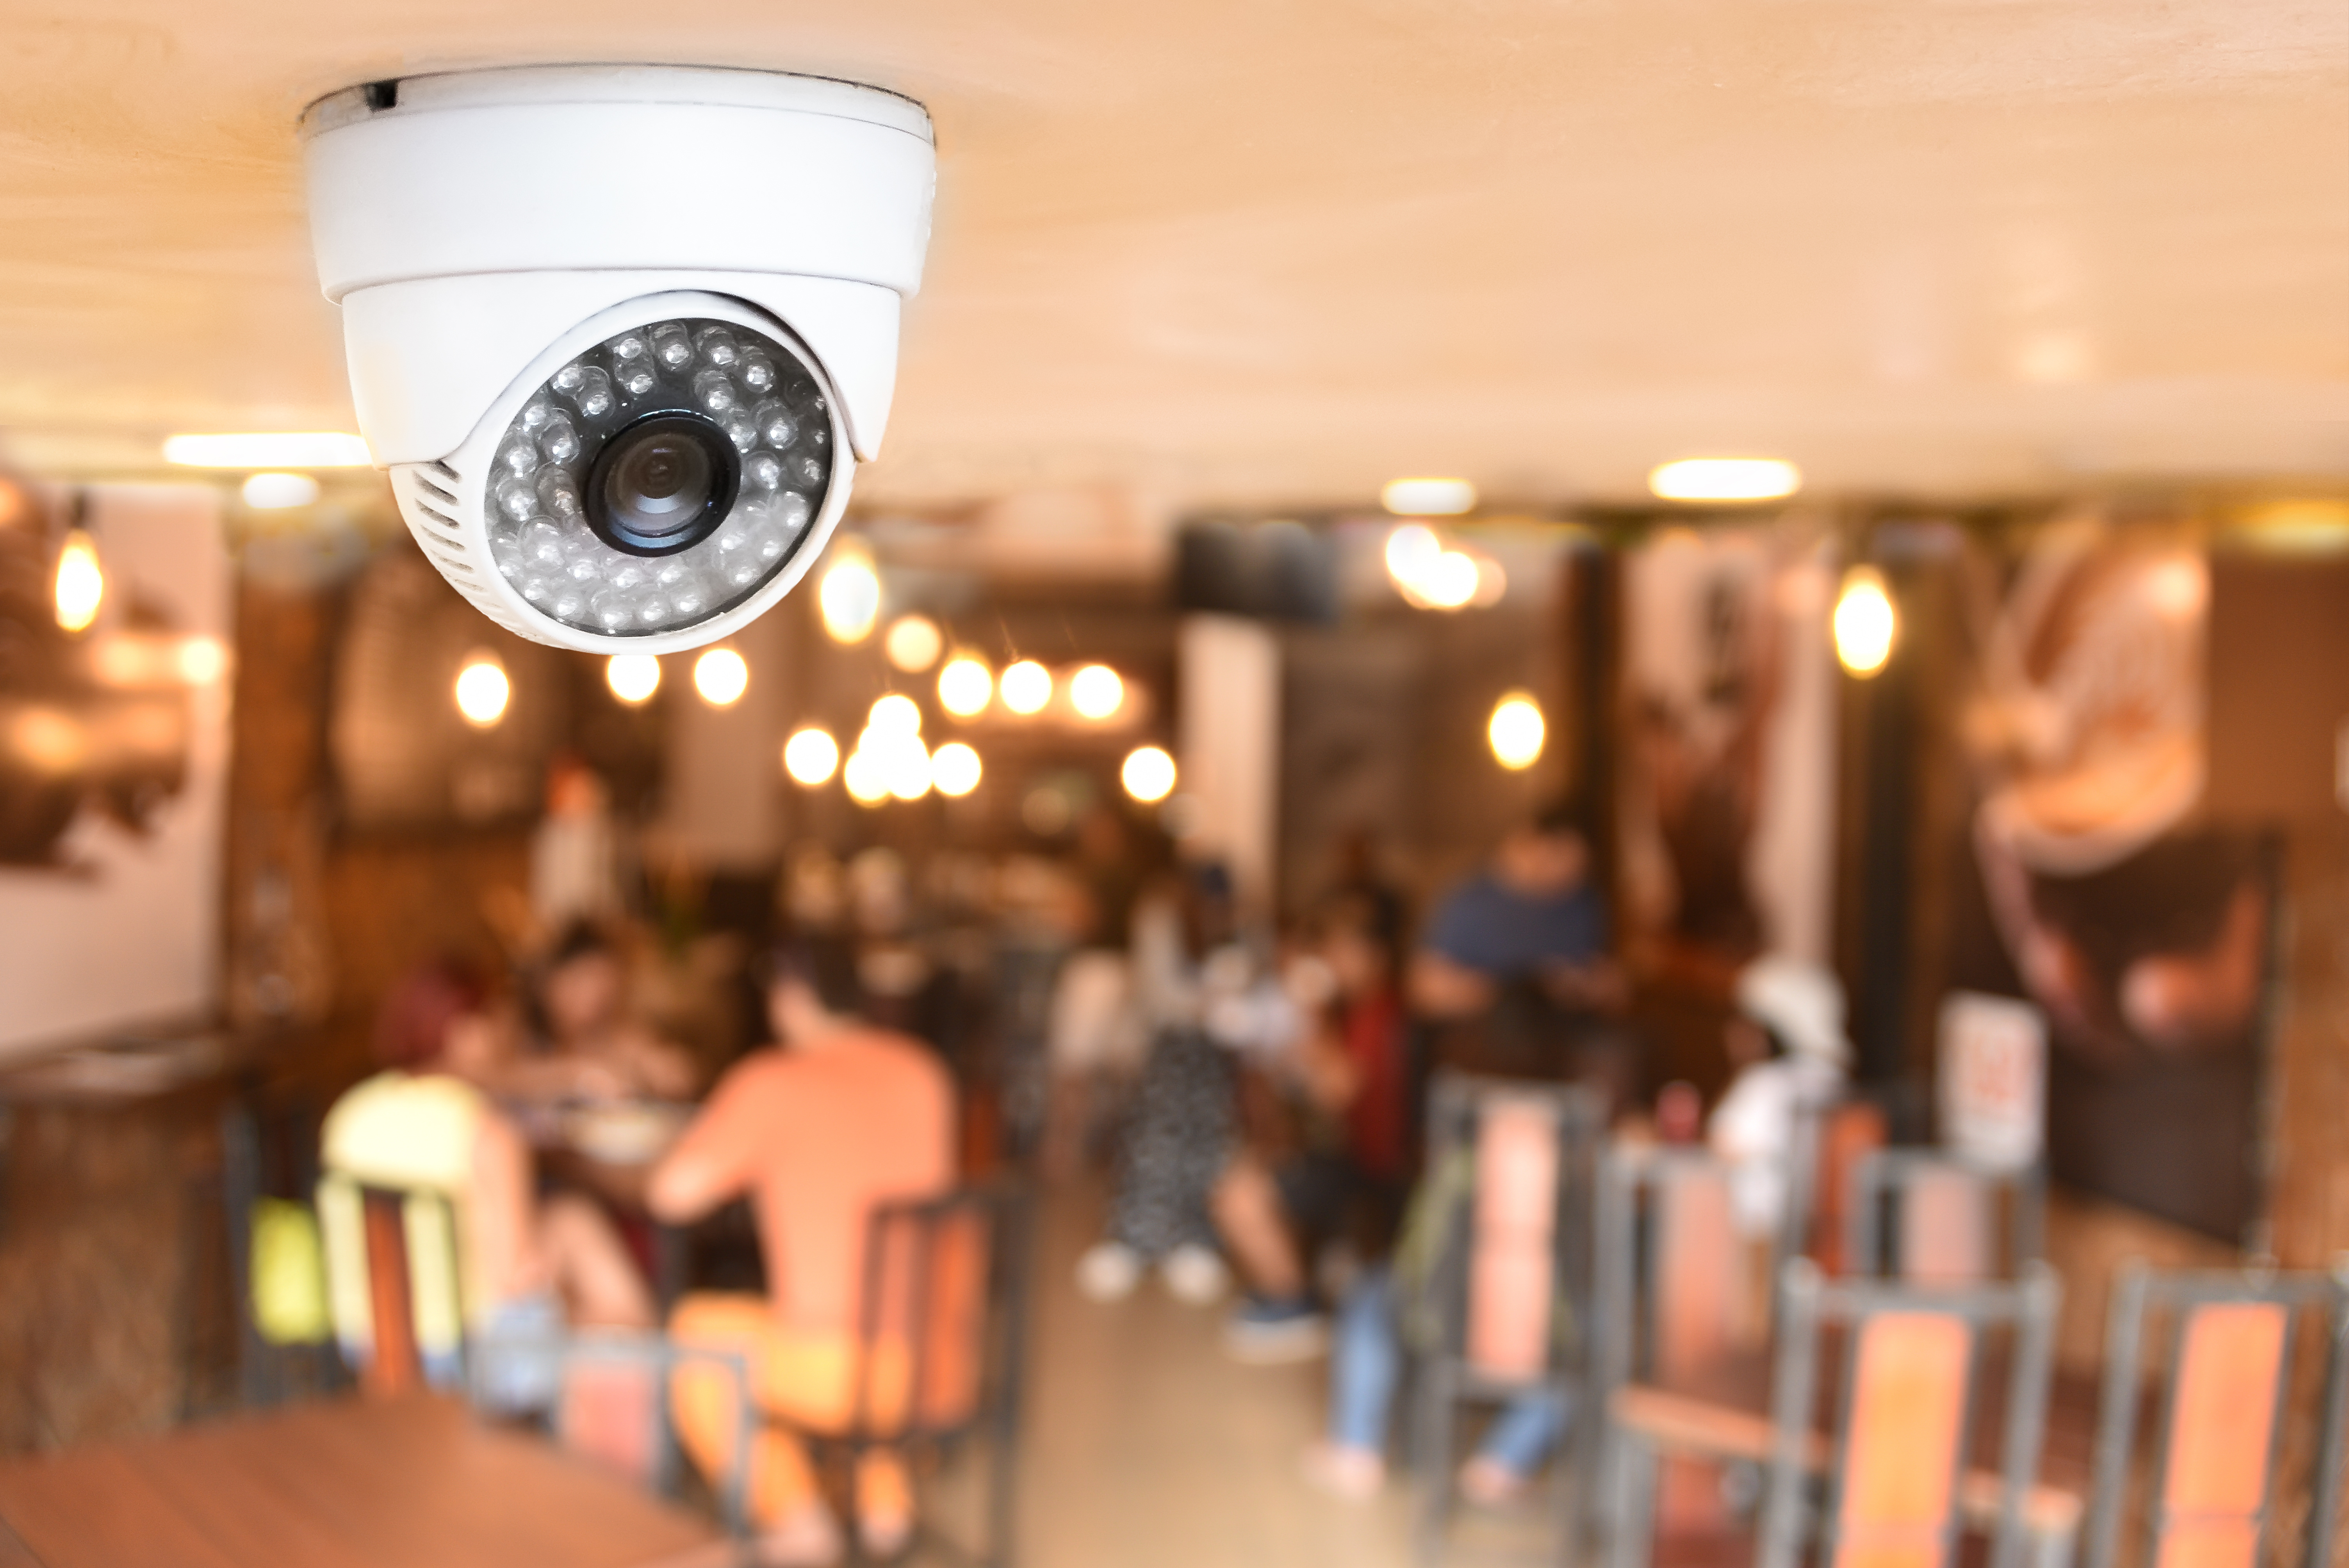 Camera Technology being used in a restaurant.